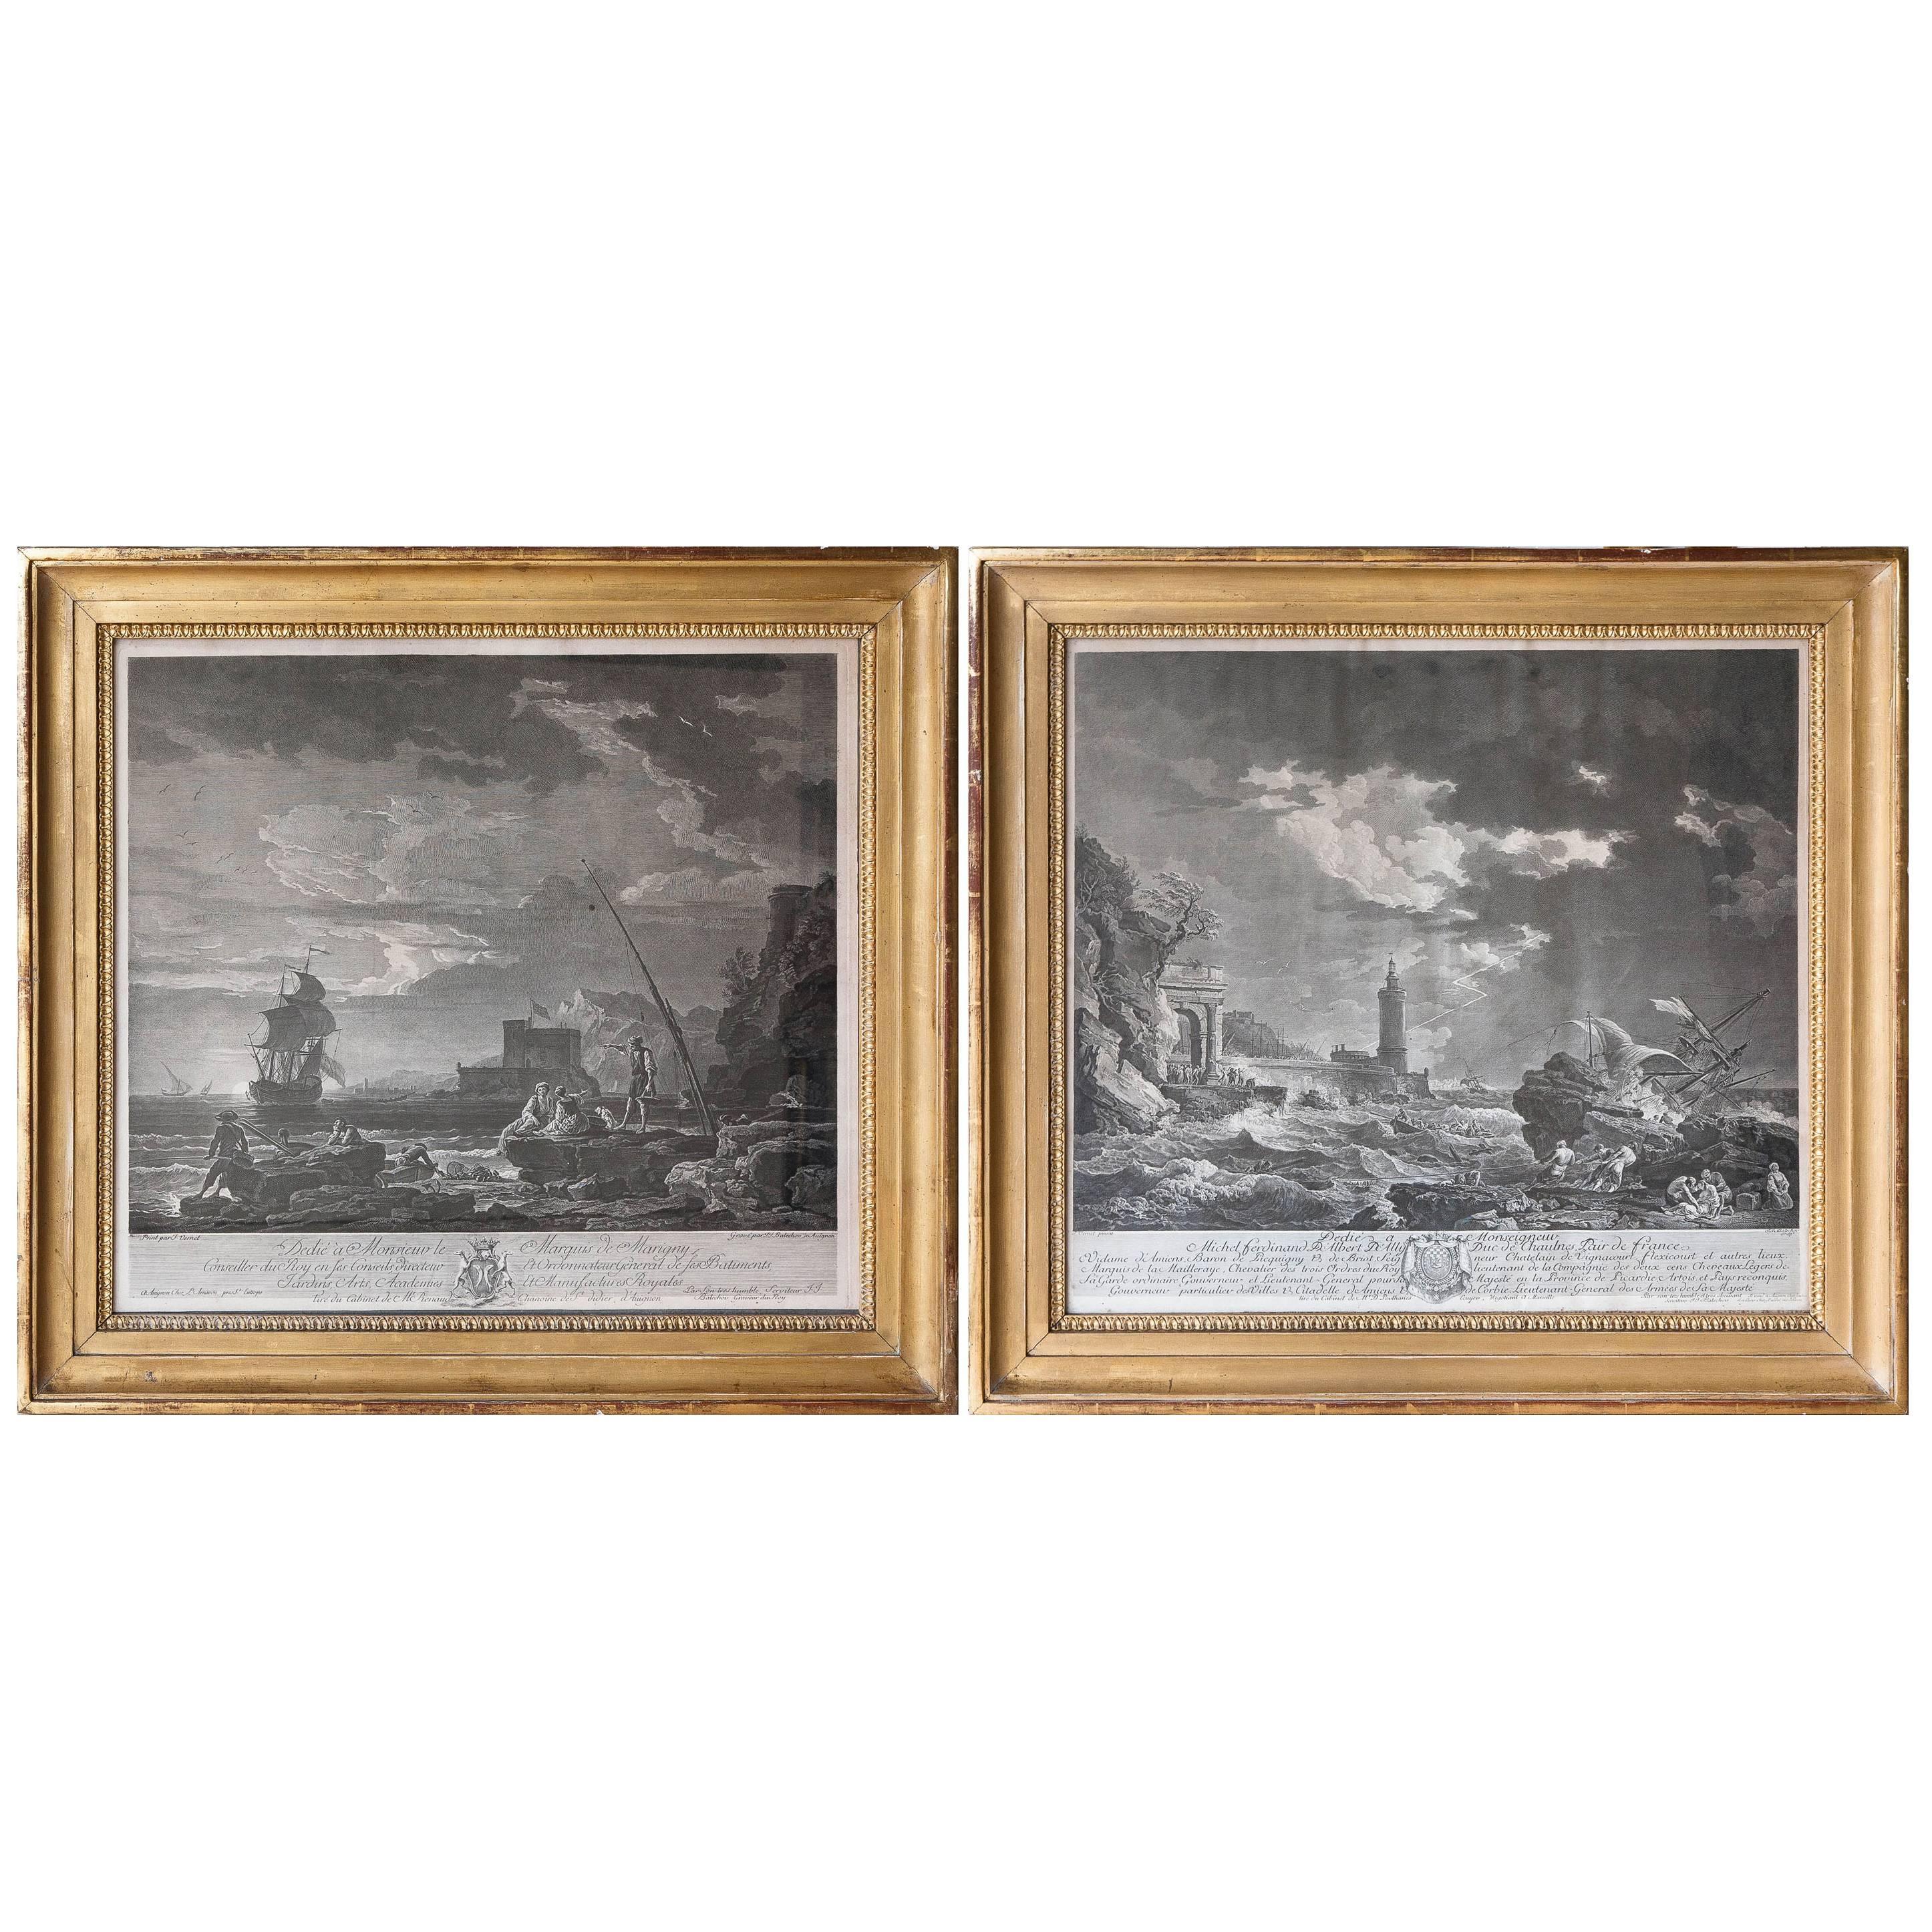 Pair of 18th Century Engravings from the Series 'the Tempest' by Joseph Vernet